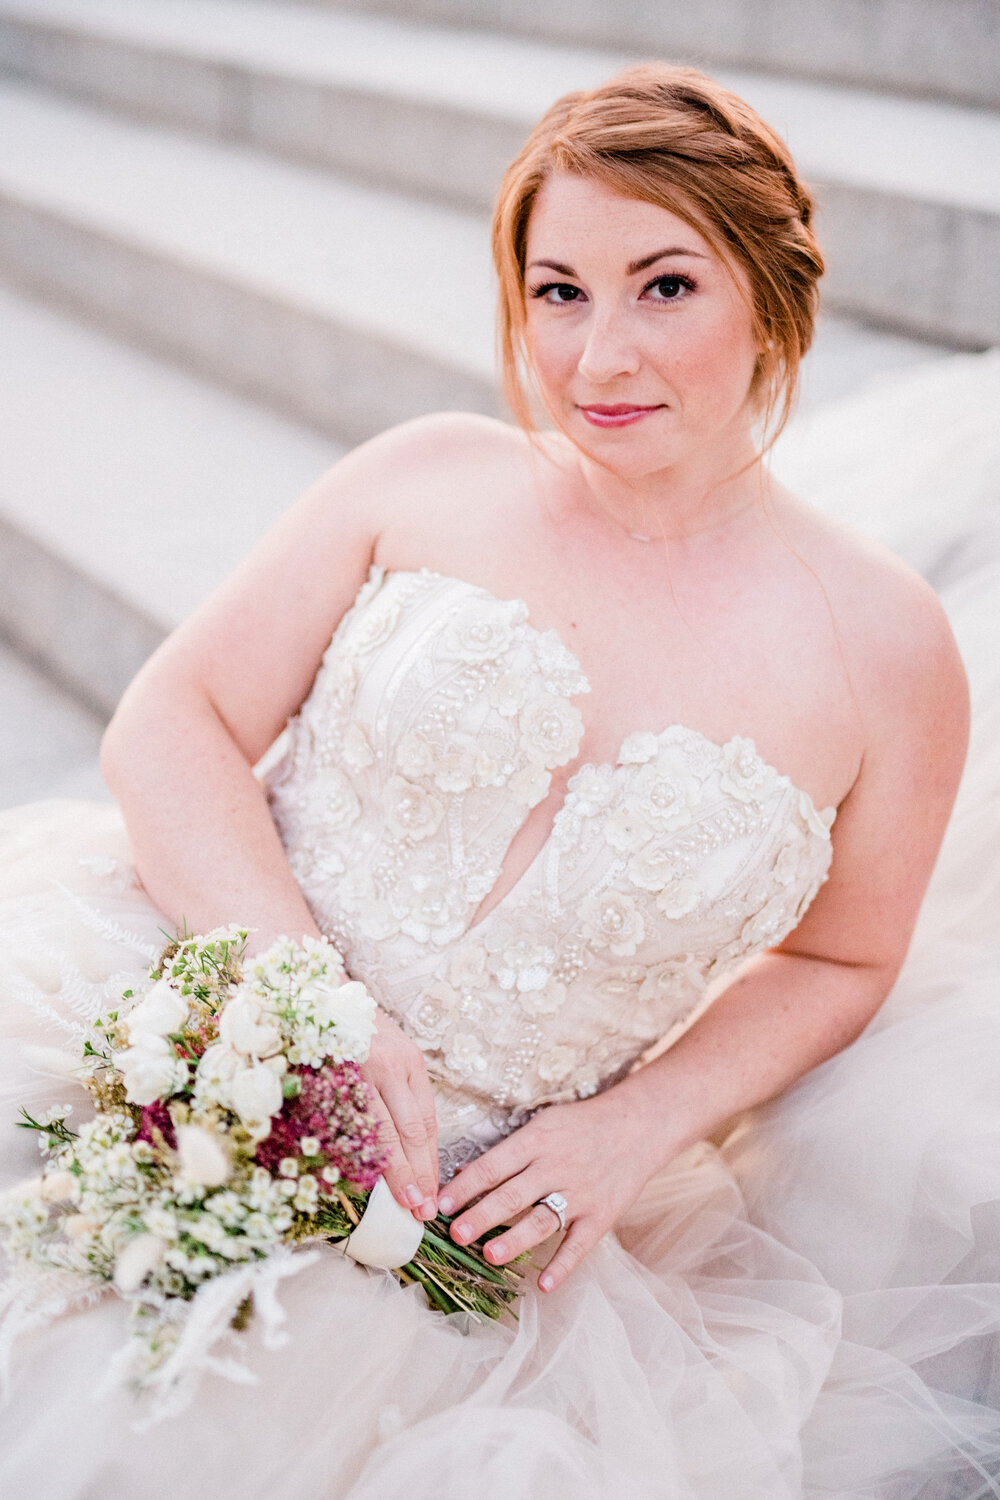 Renee Grace Bridal gown from Ivory &amp; Ash Bridal featured in a styled shoot